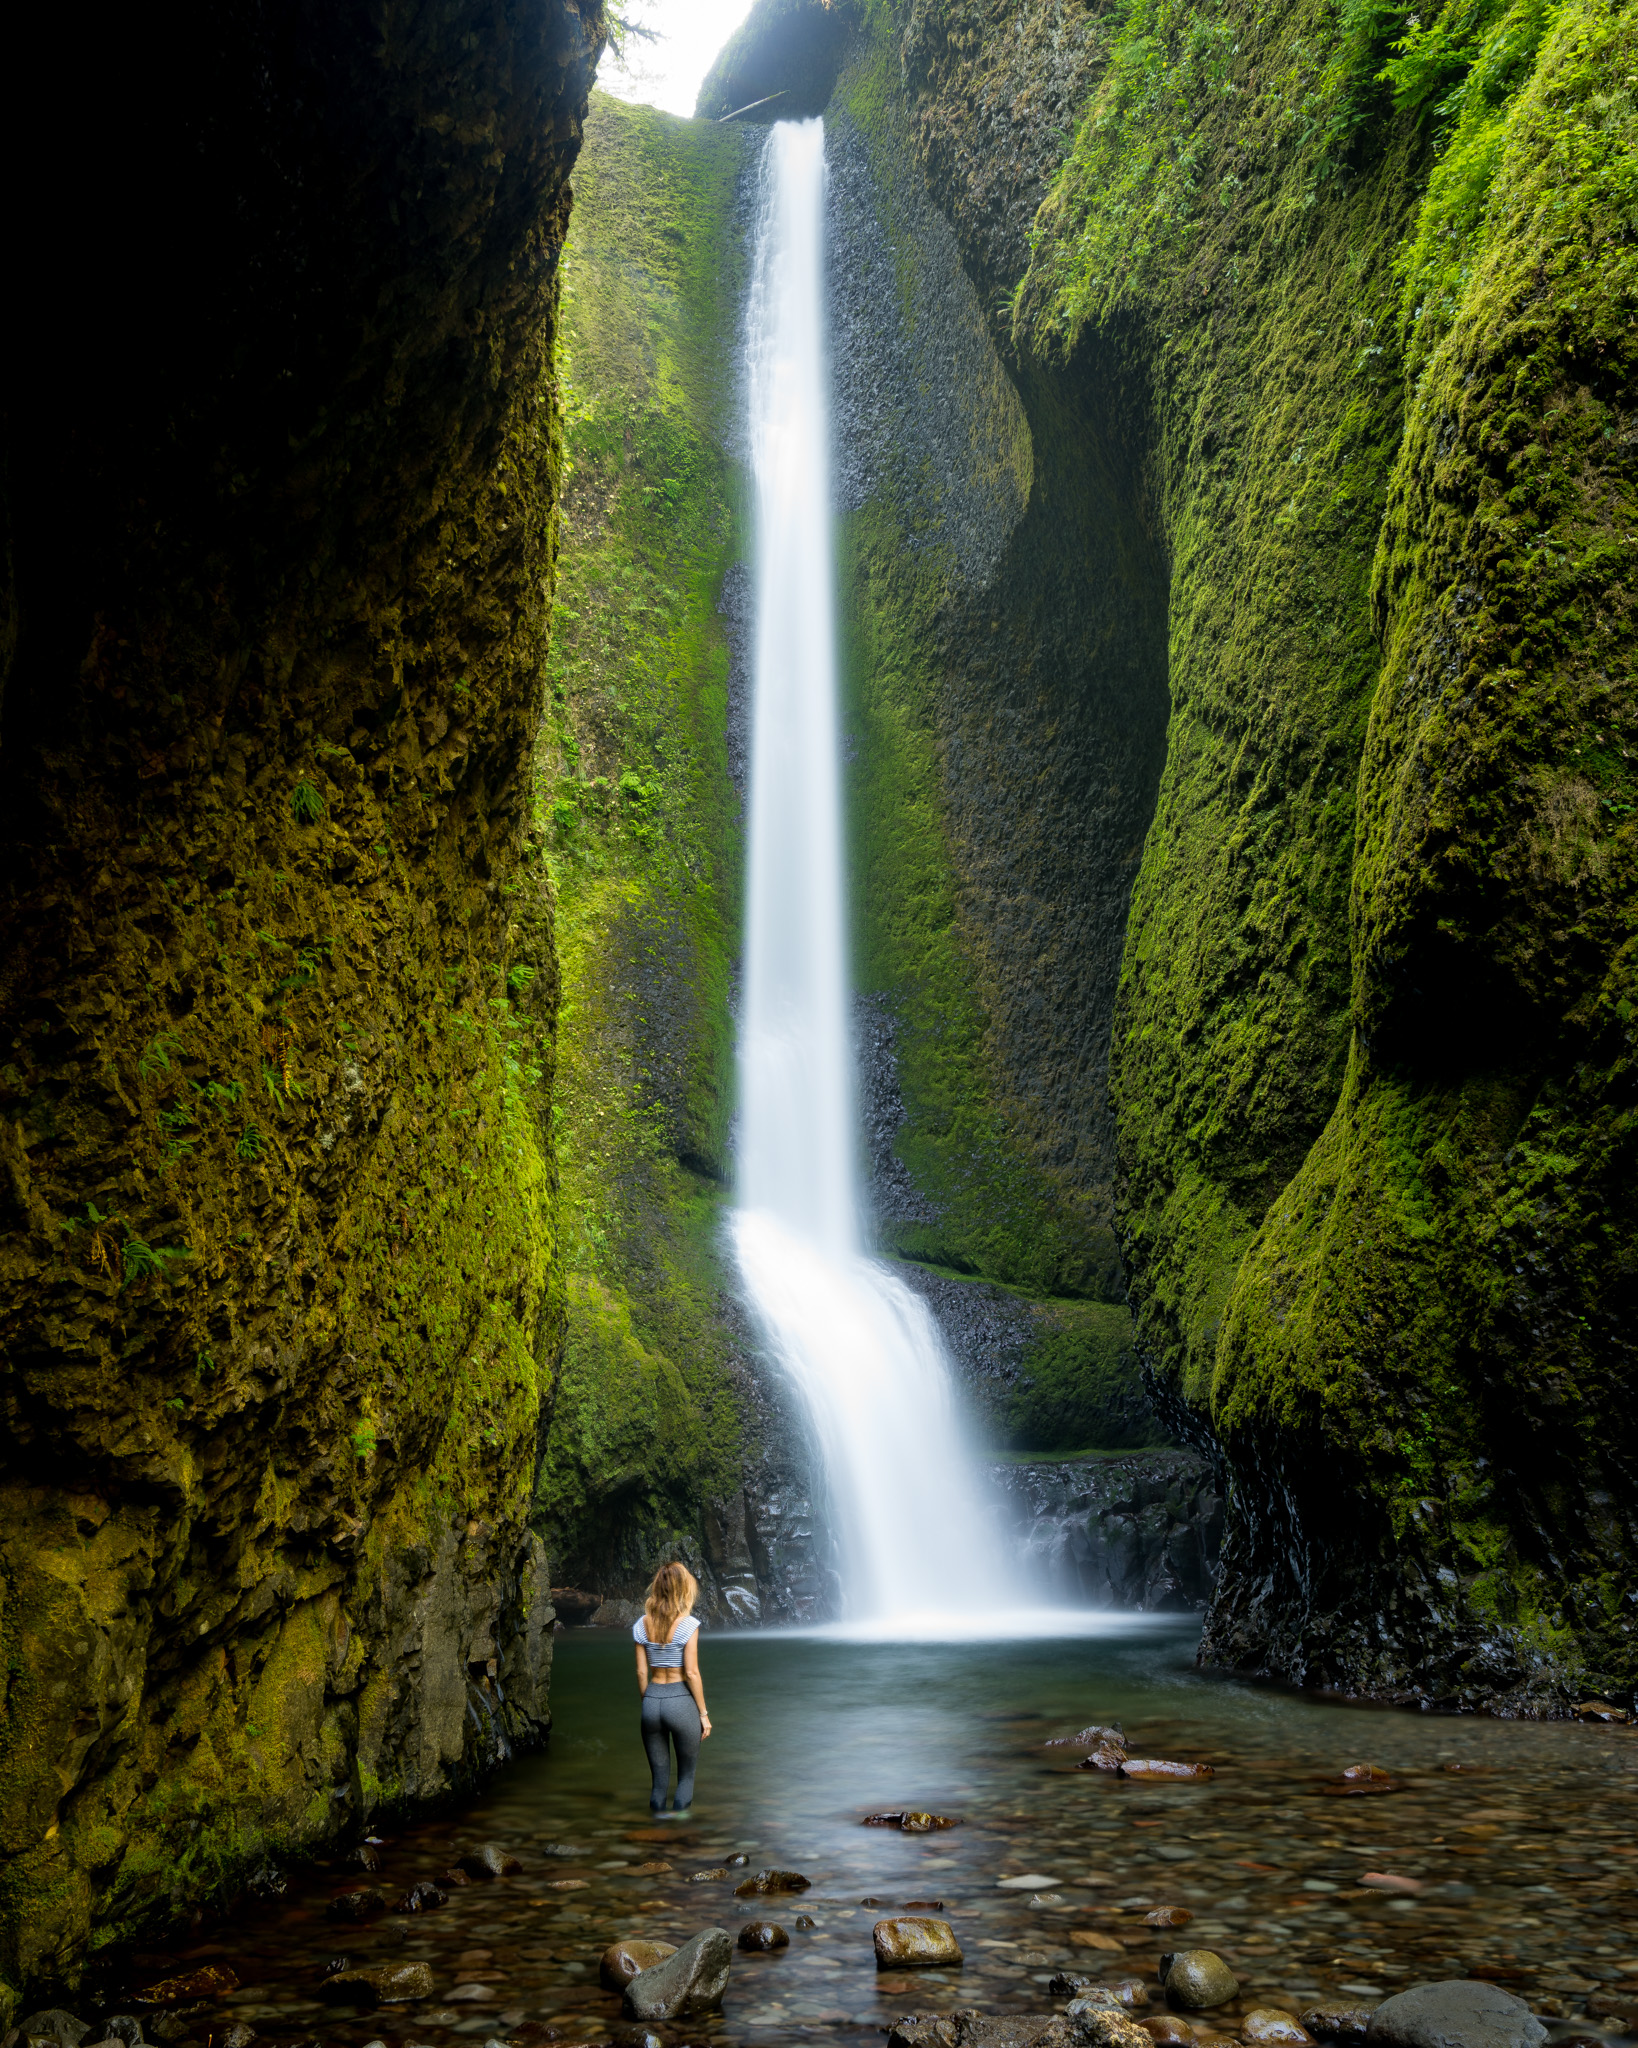 Photo taken at Oneonta Gorge      (currently closed due to fire damage so please check for reopening before going).